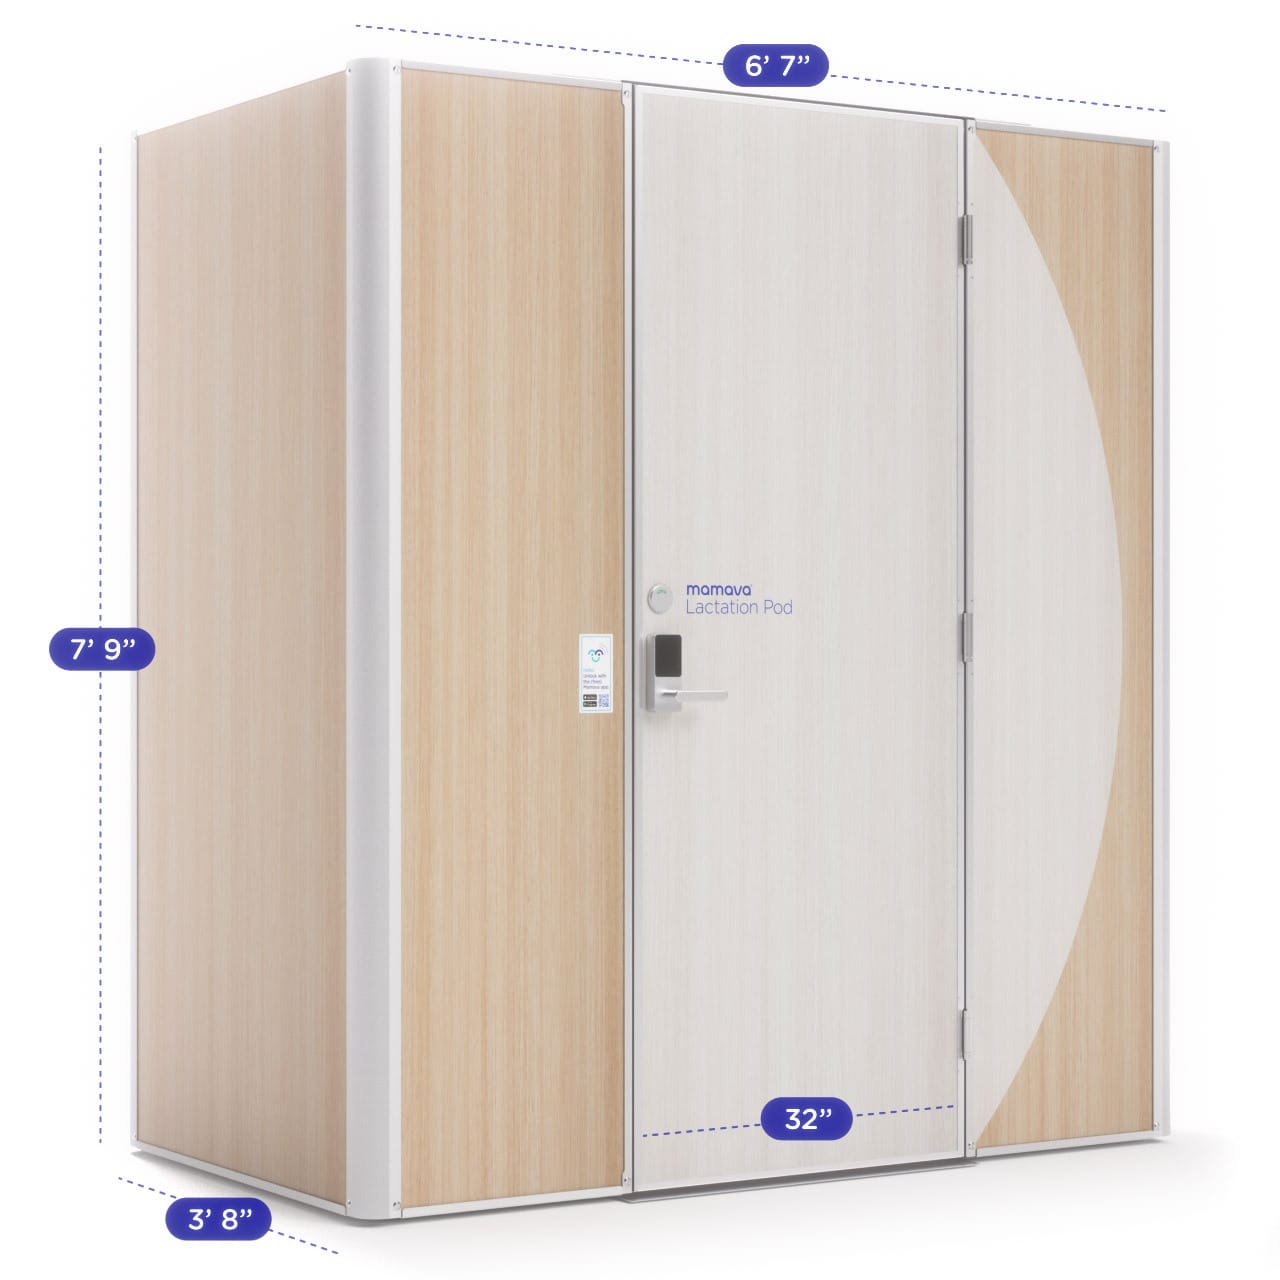 A Mamava lactation pod with natural wood finish and white door, featuring dimensions: height of 6 feet 7 inches, width of 3 feet 8 inches, and depth of 7 feet 4 inches, with a 32-inch door width.